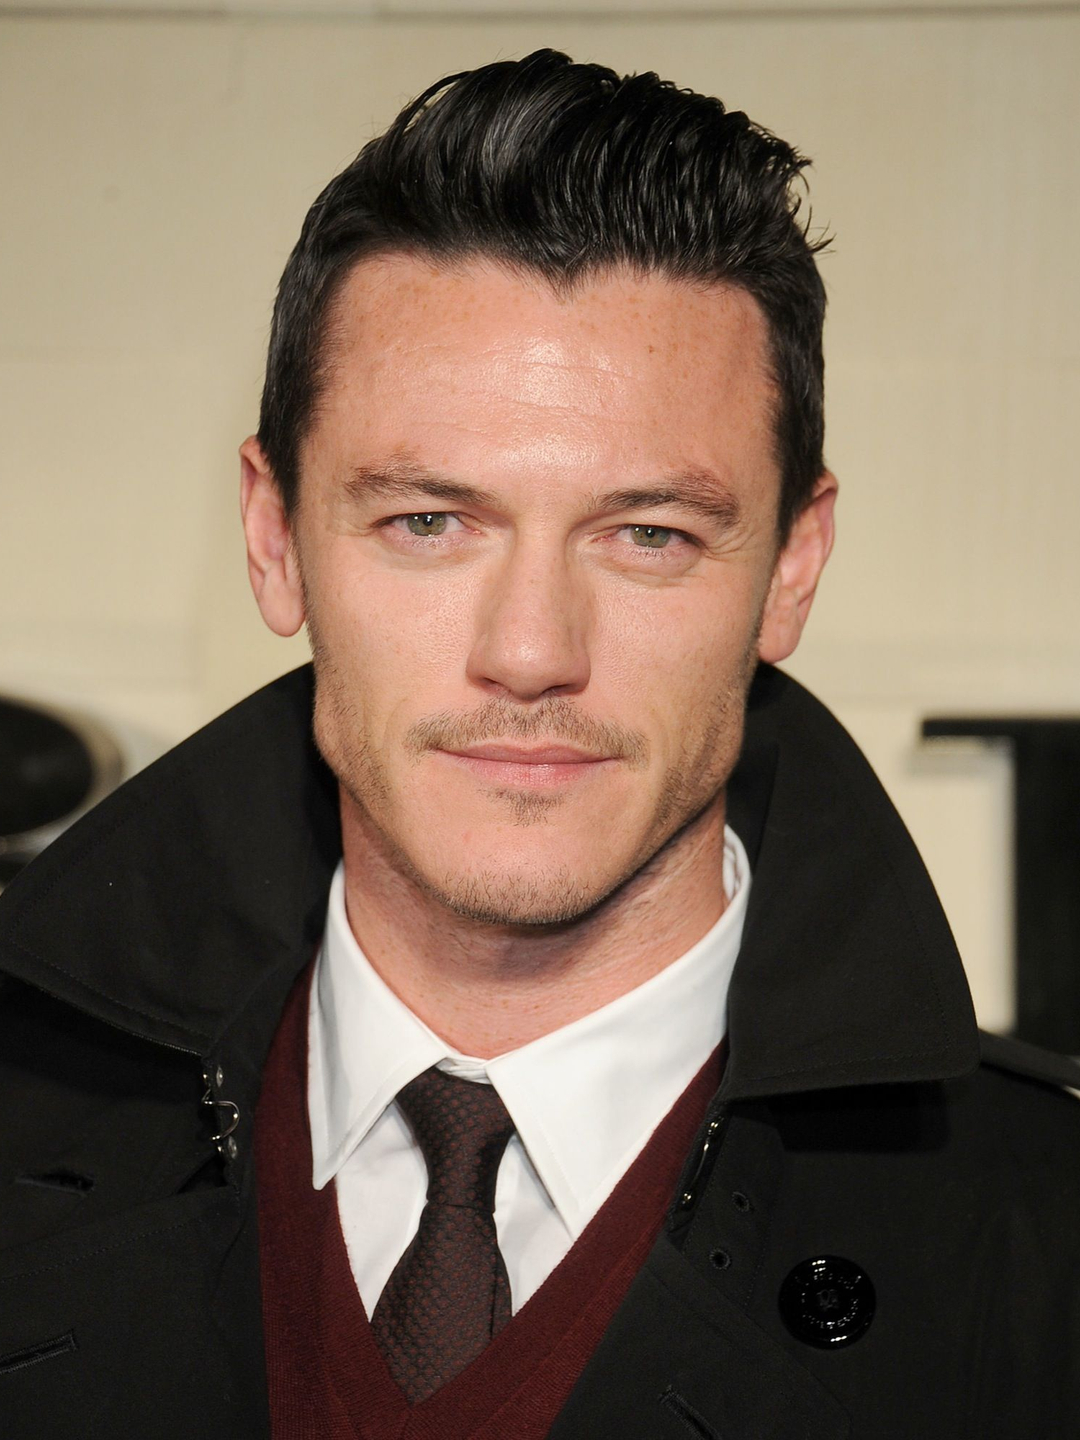 Luke Evans who is his father